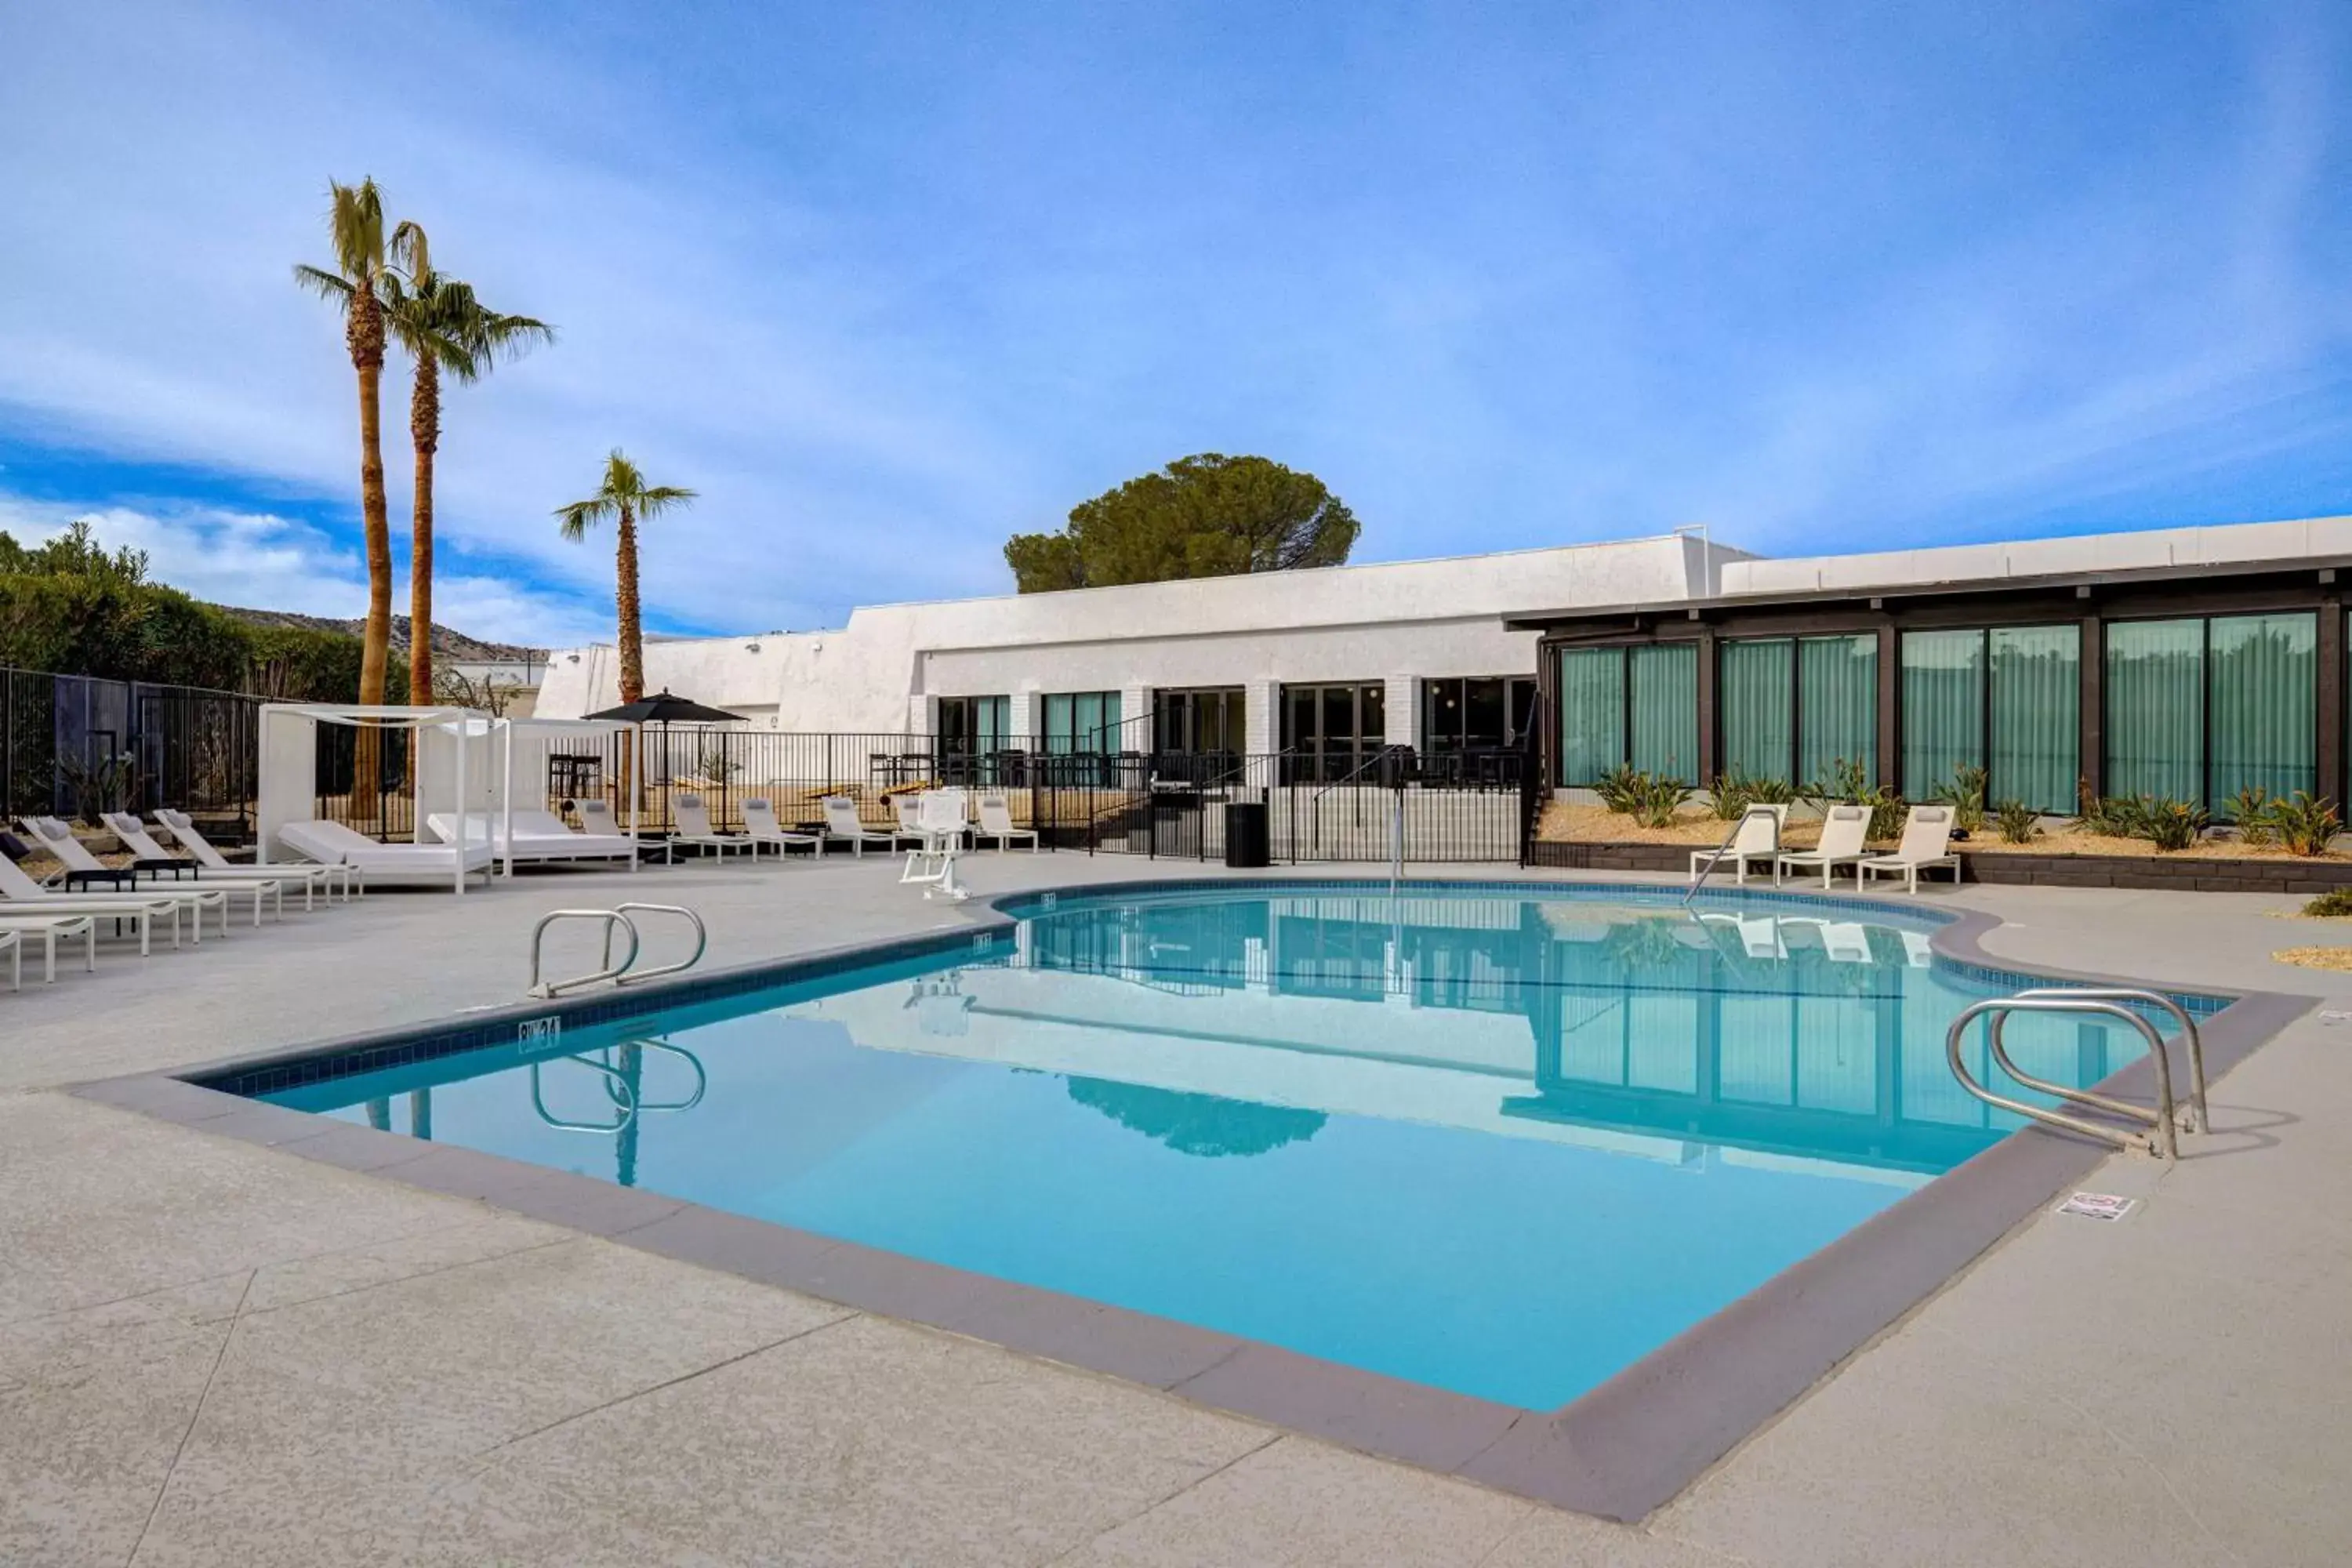 Property building, Swimming Pool in Doubletree By Hilton Palmdale, Ca